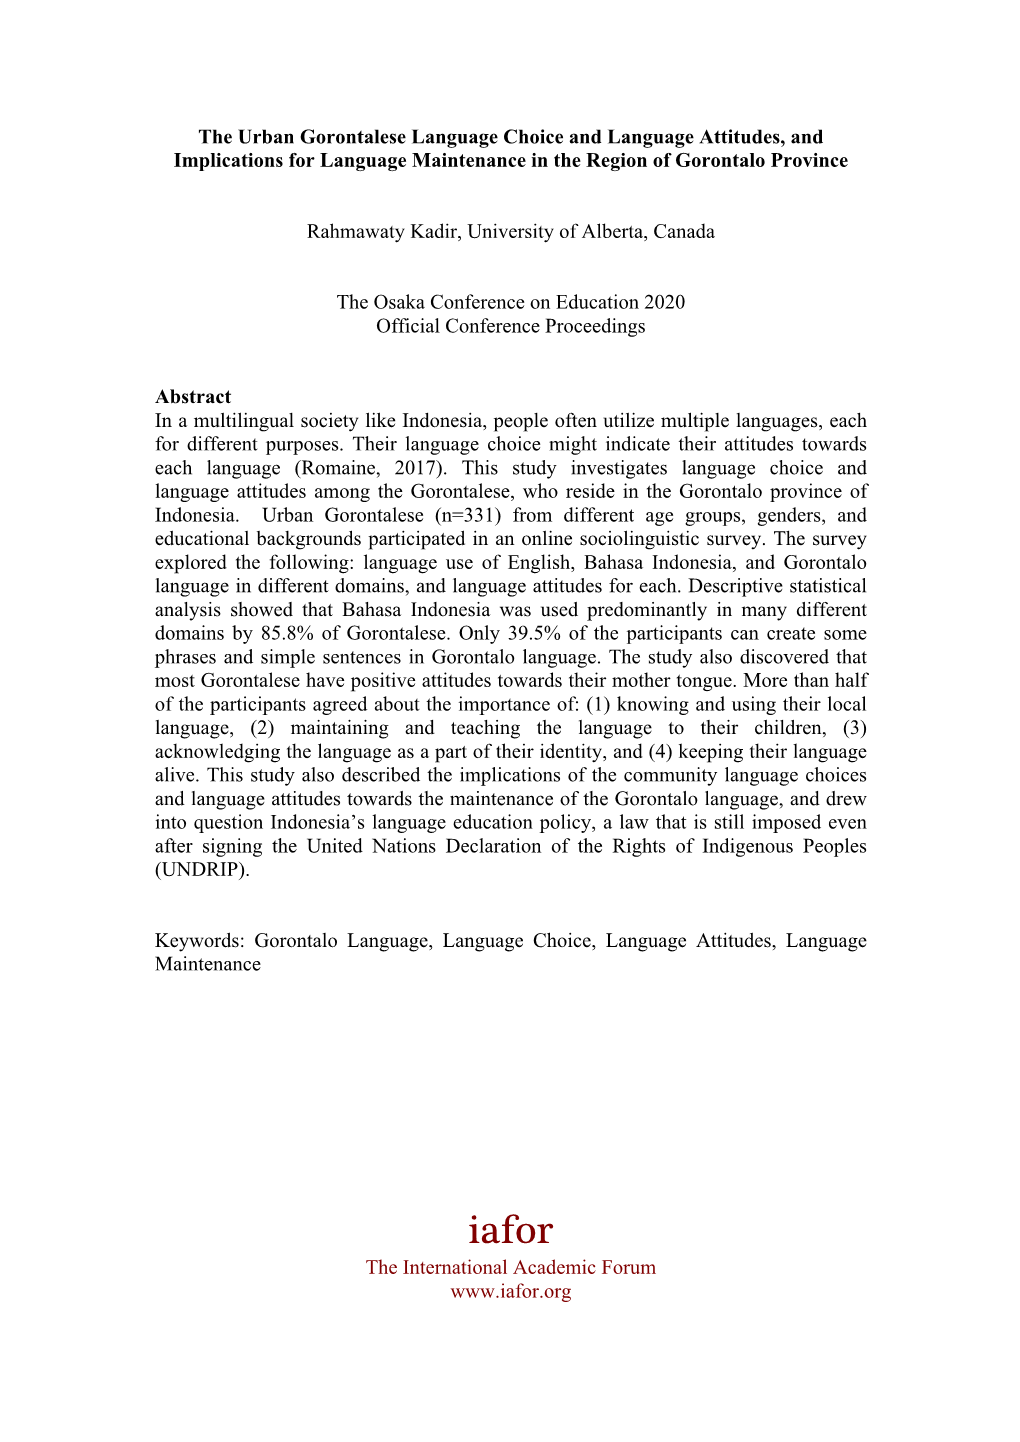 The Urban Gorontalese Language Choice and Language Attitudes, and Implications for Language Maintenance in the Region of Gorontalo Province